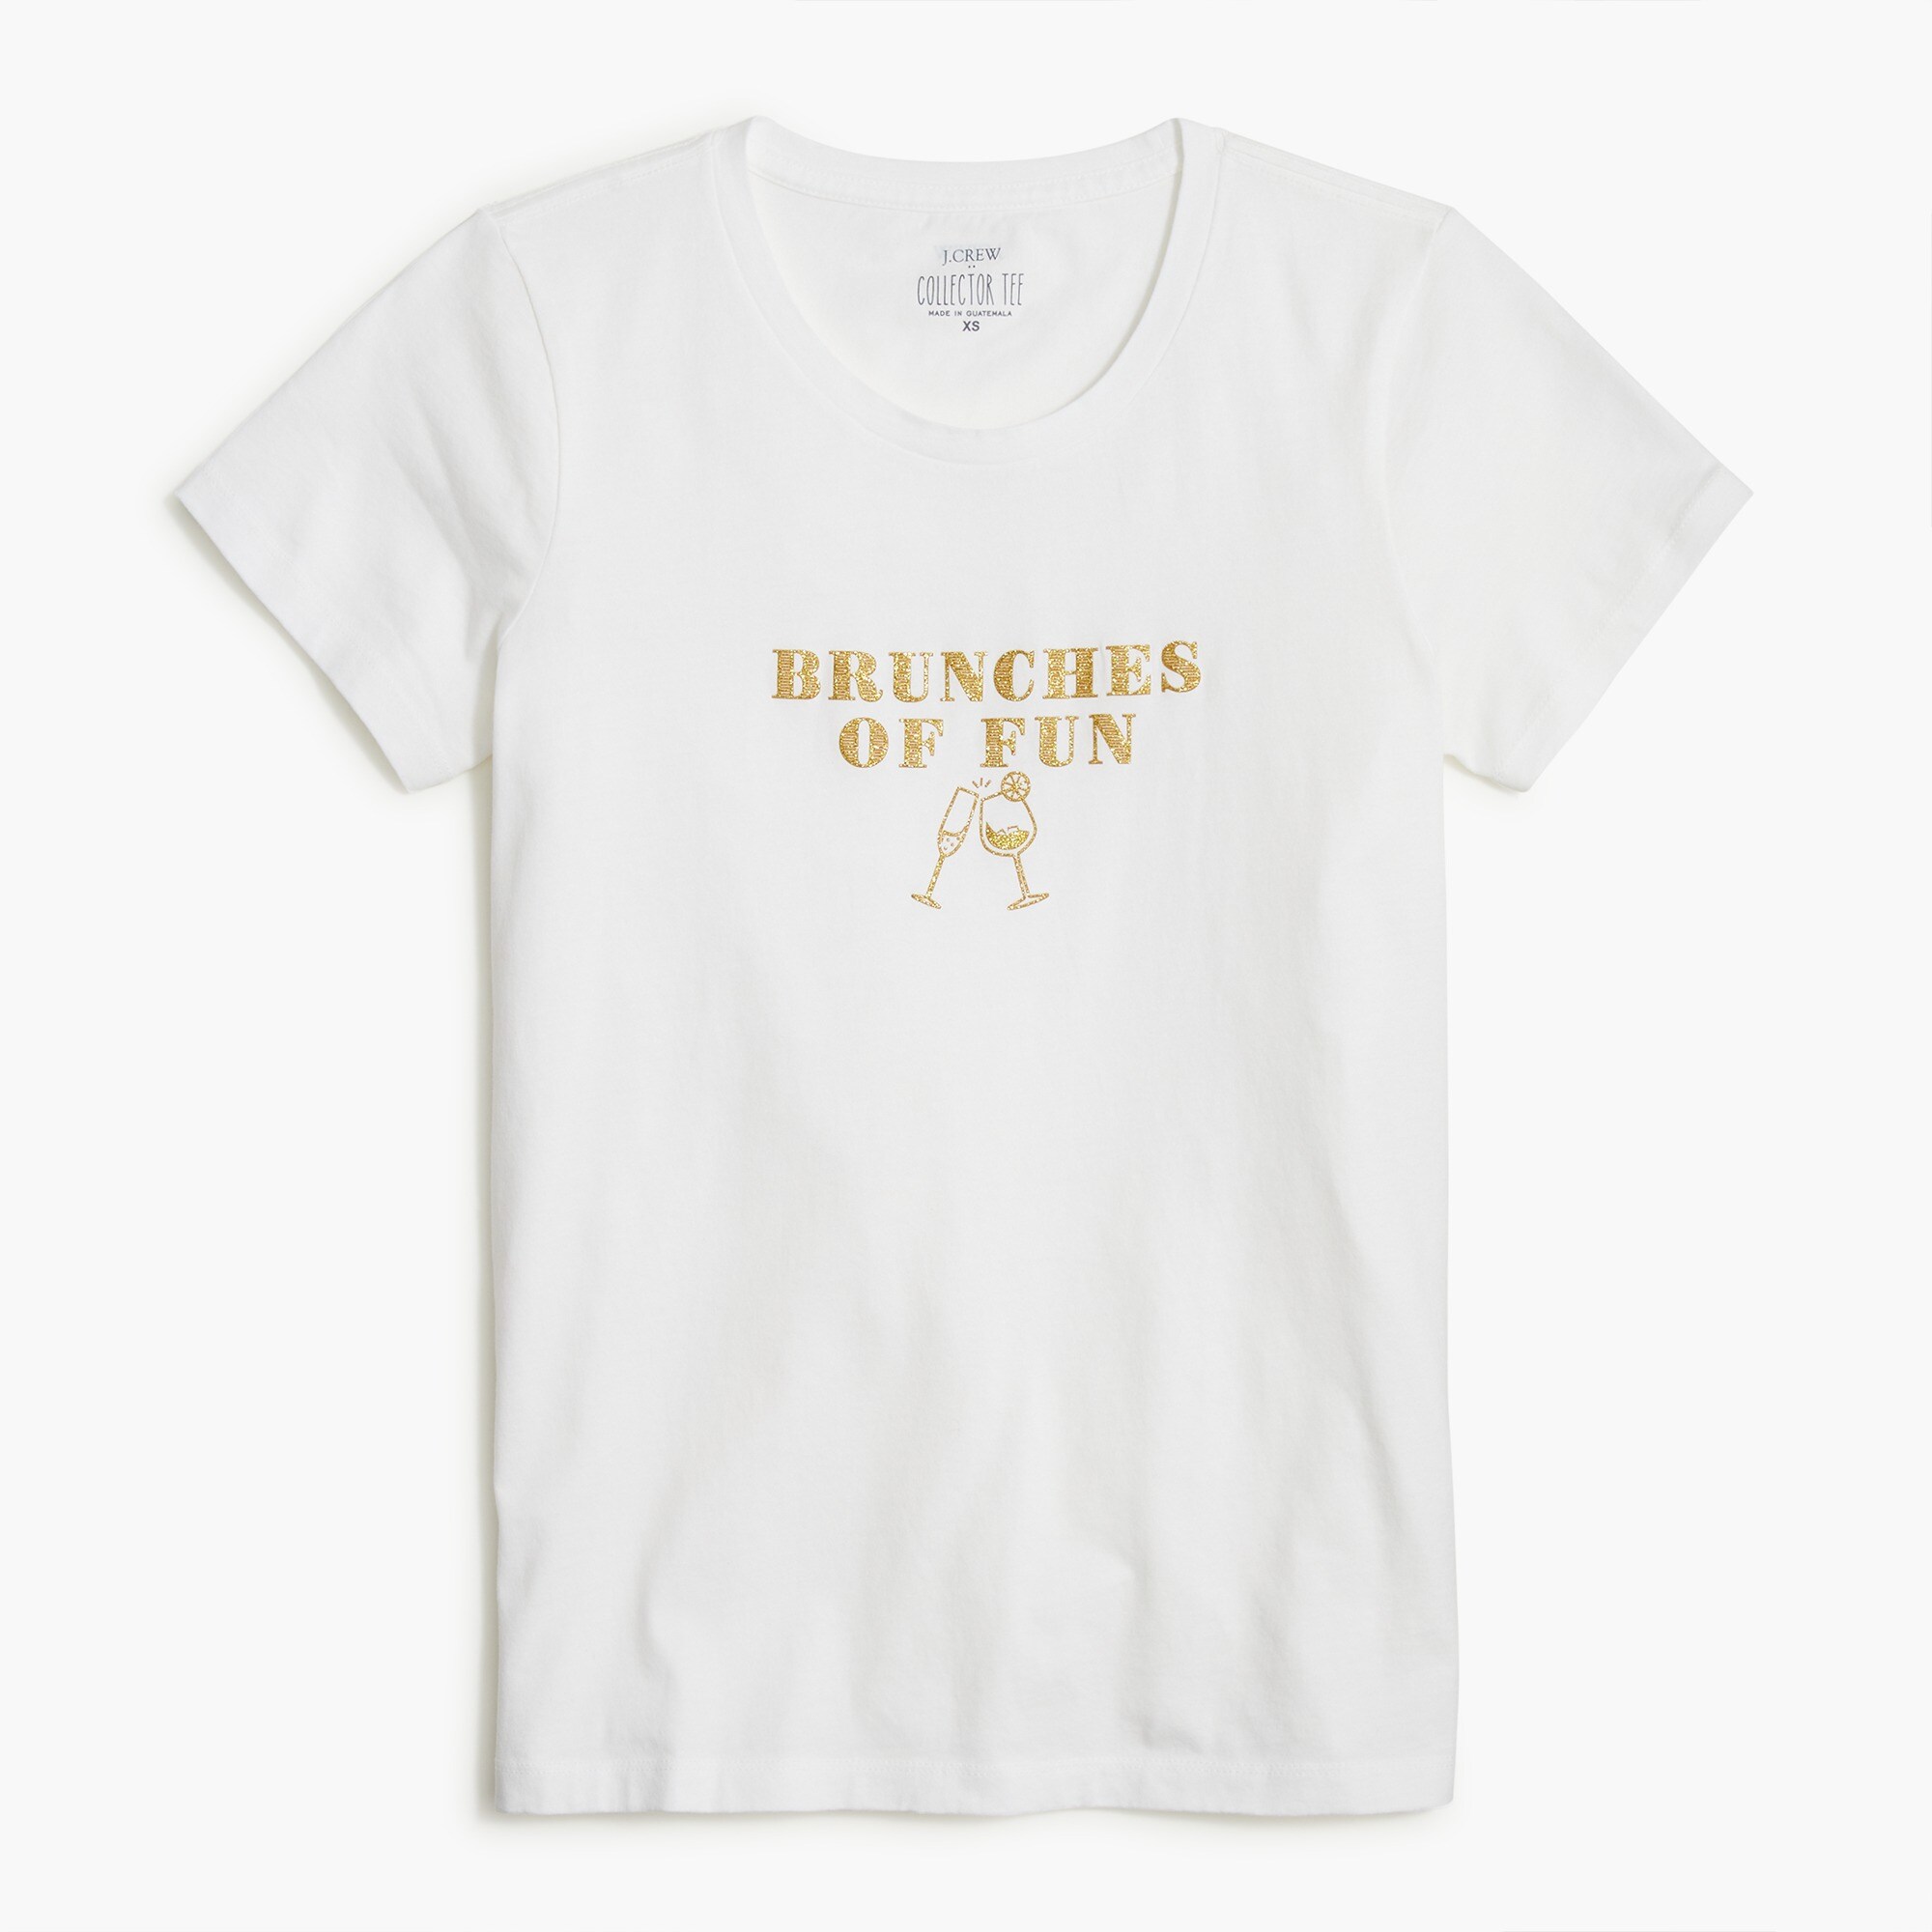  &quot;Brunches of fun&quot; glitter graphic tee